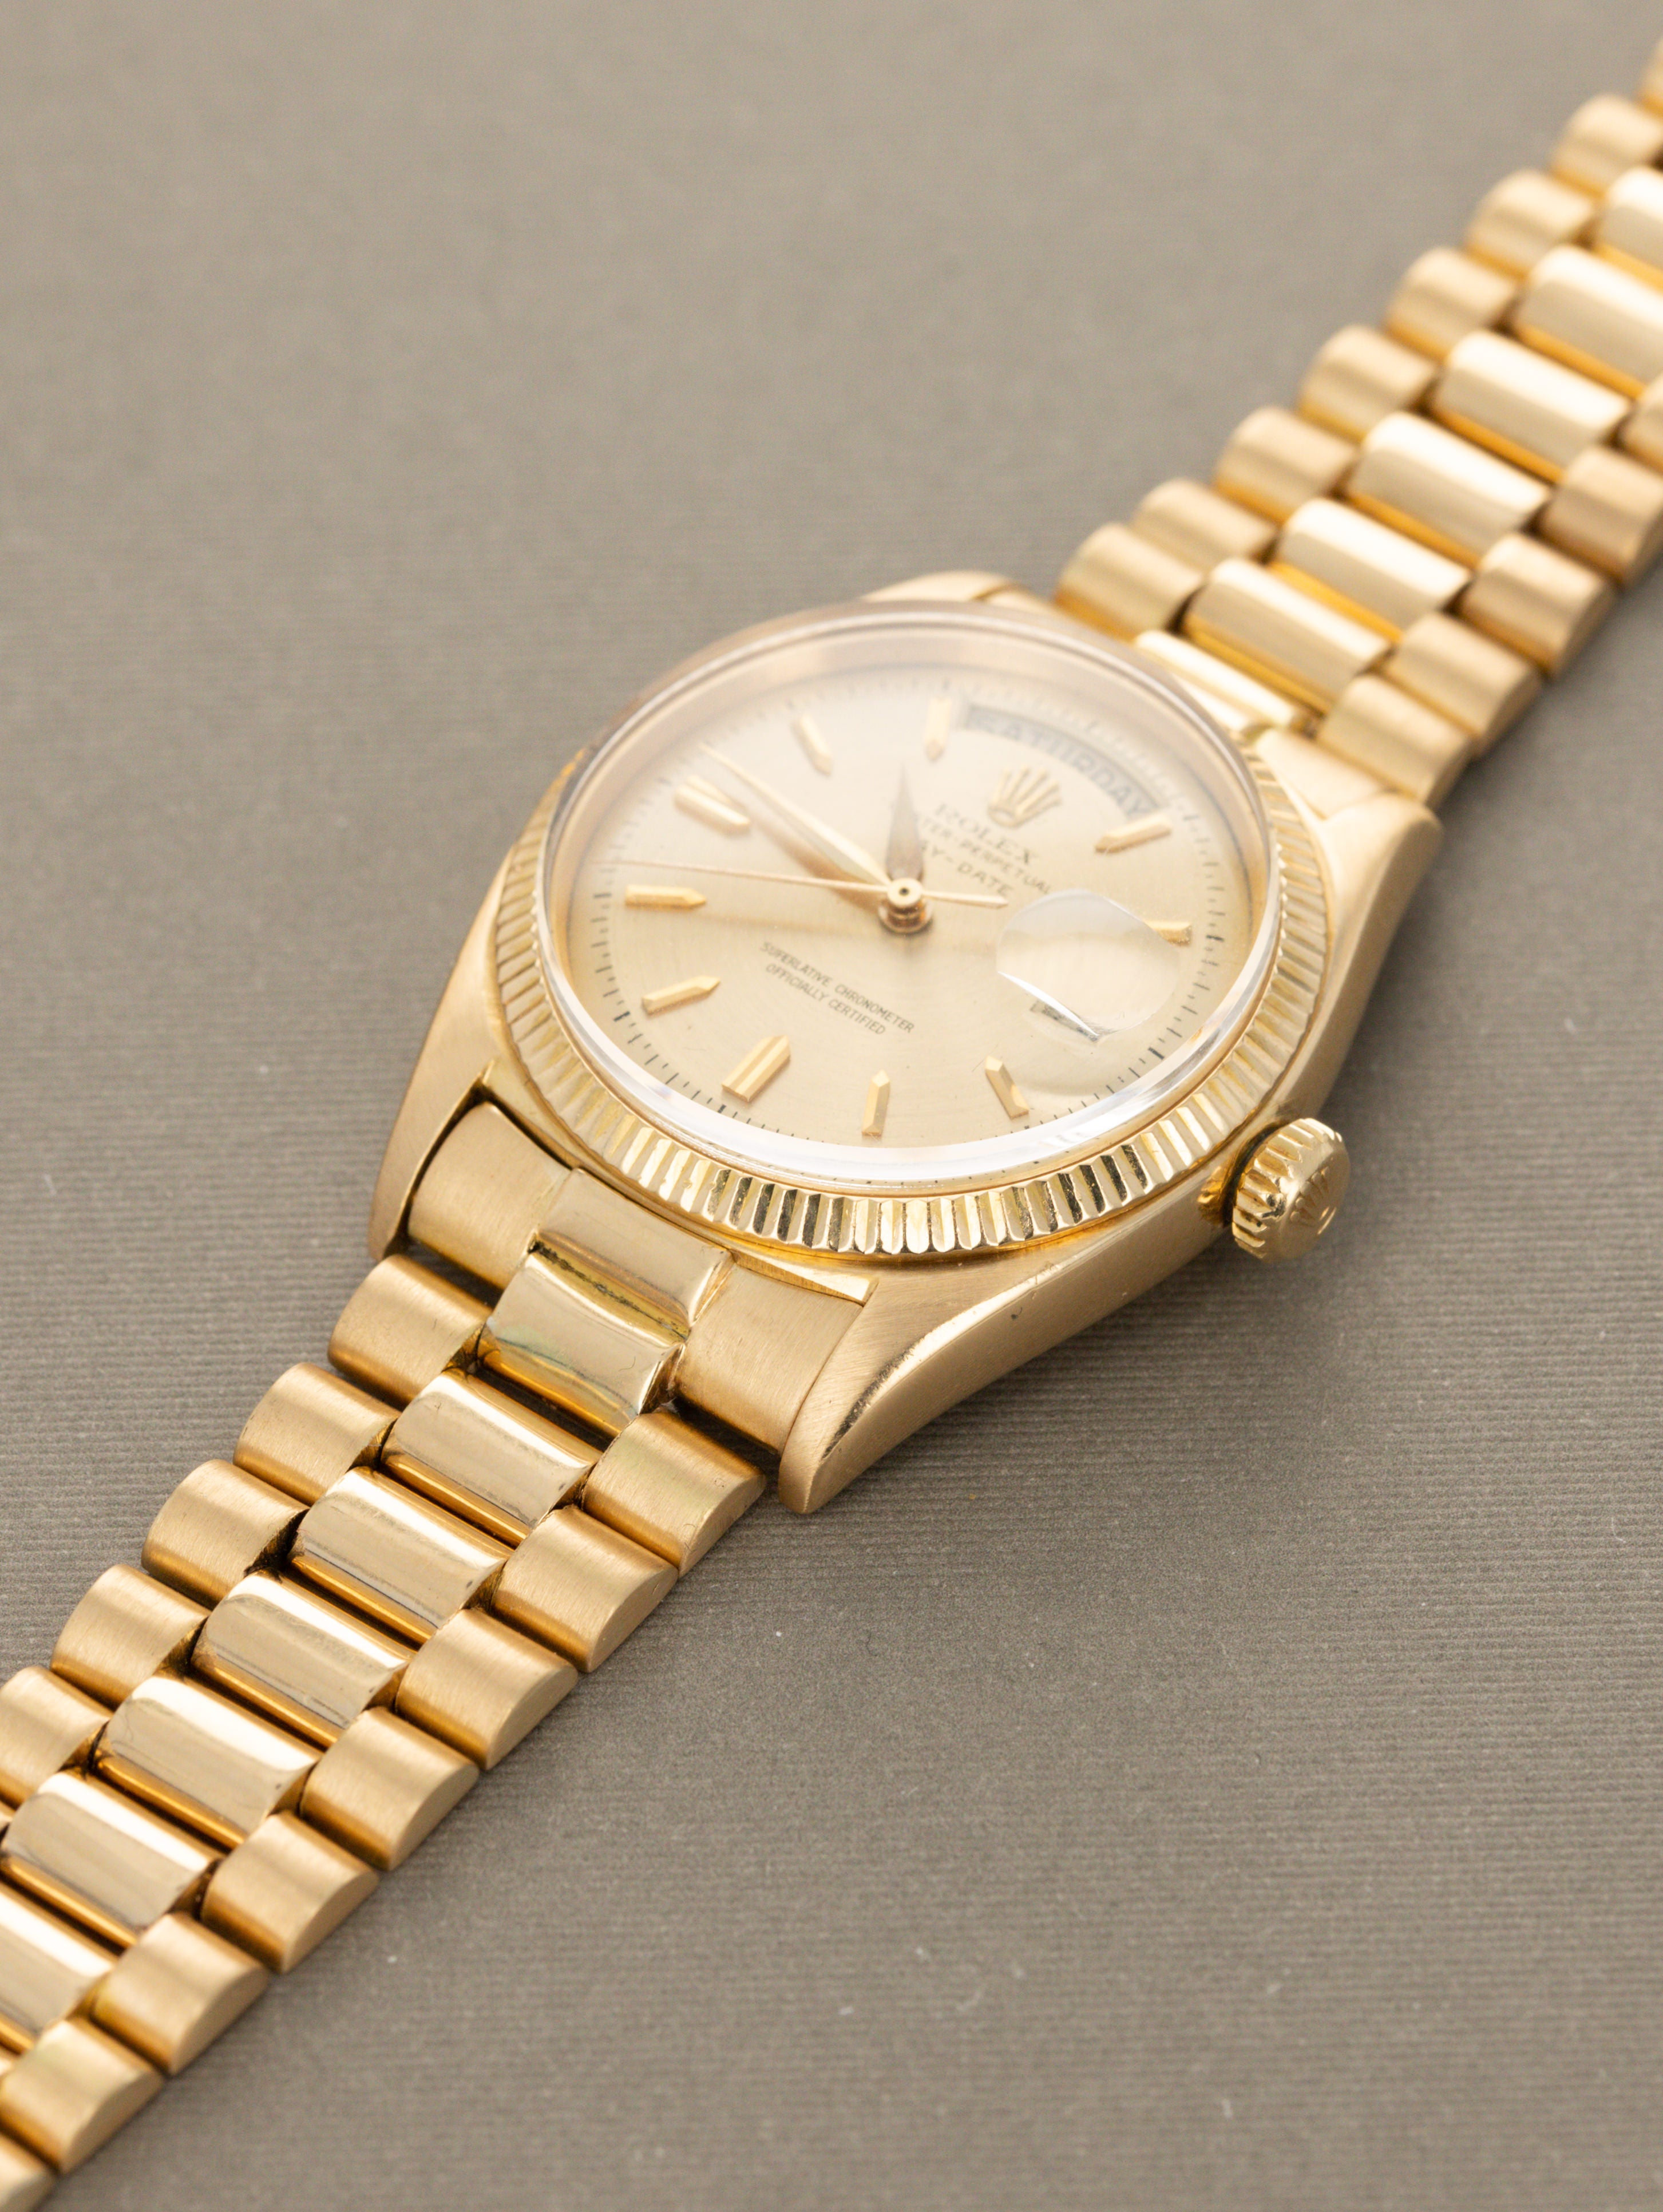 Rolex Day-Date Ref. 1803 - 'Concentric' Dial